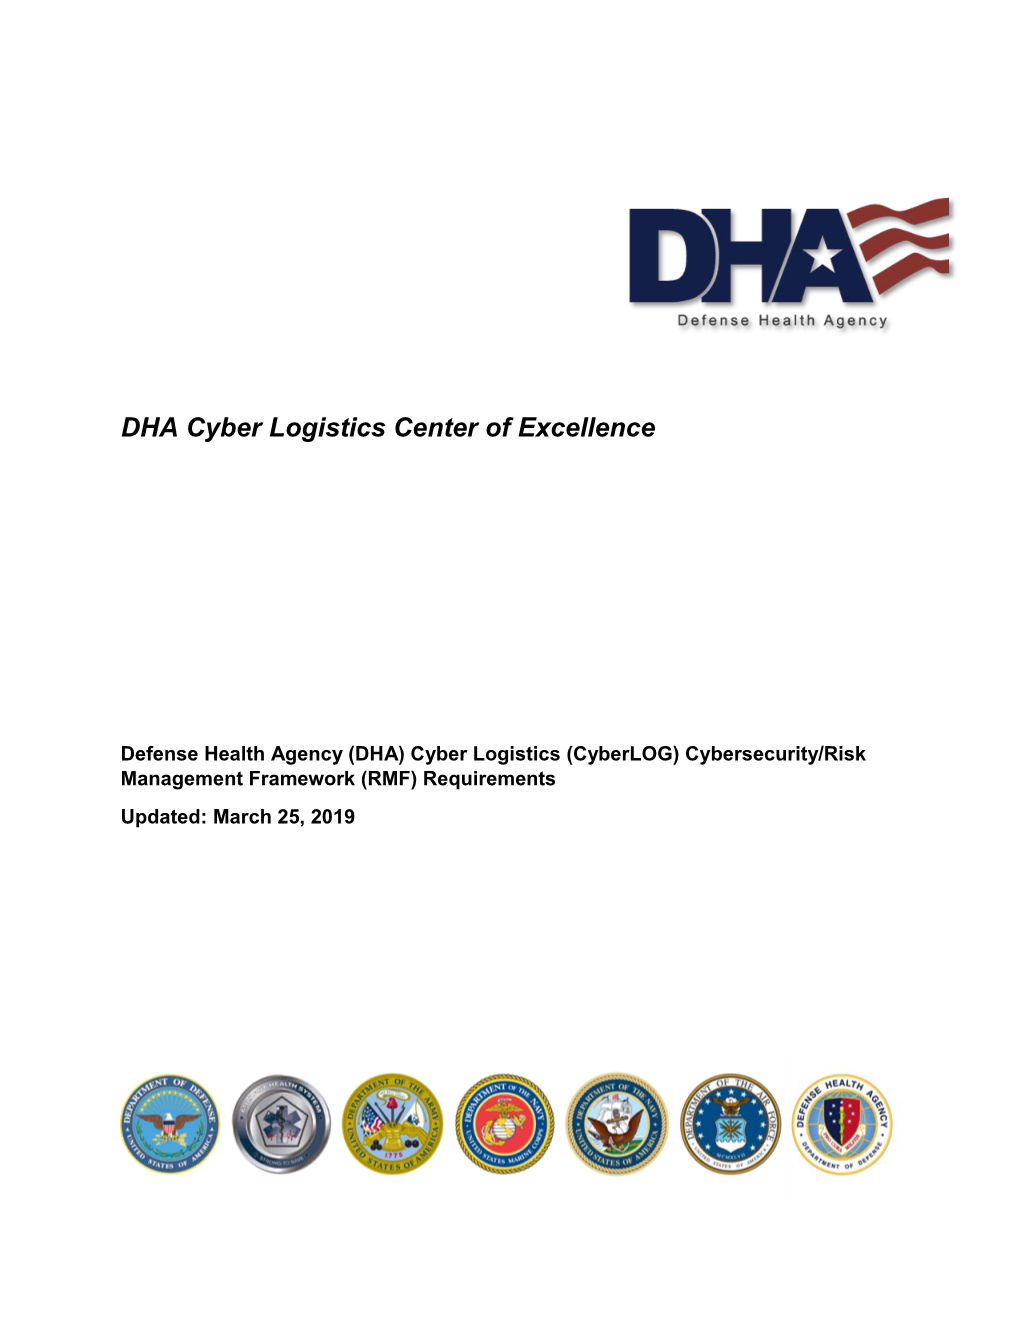 DHA Cyber Logistics Center of Excellence